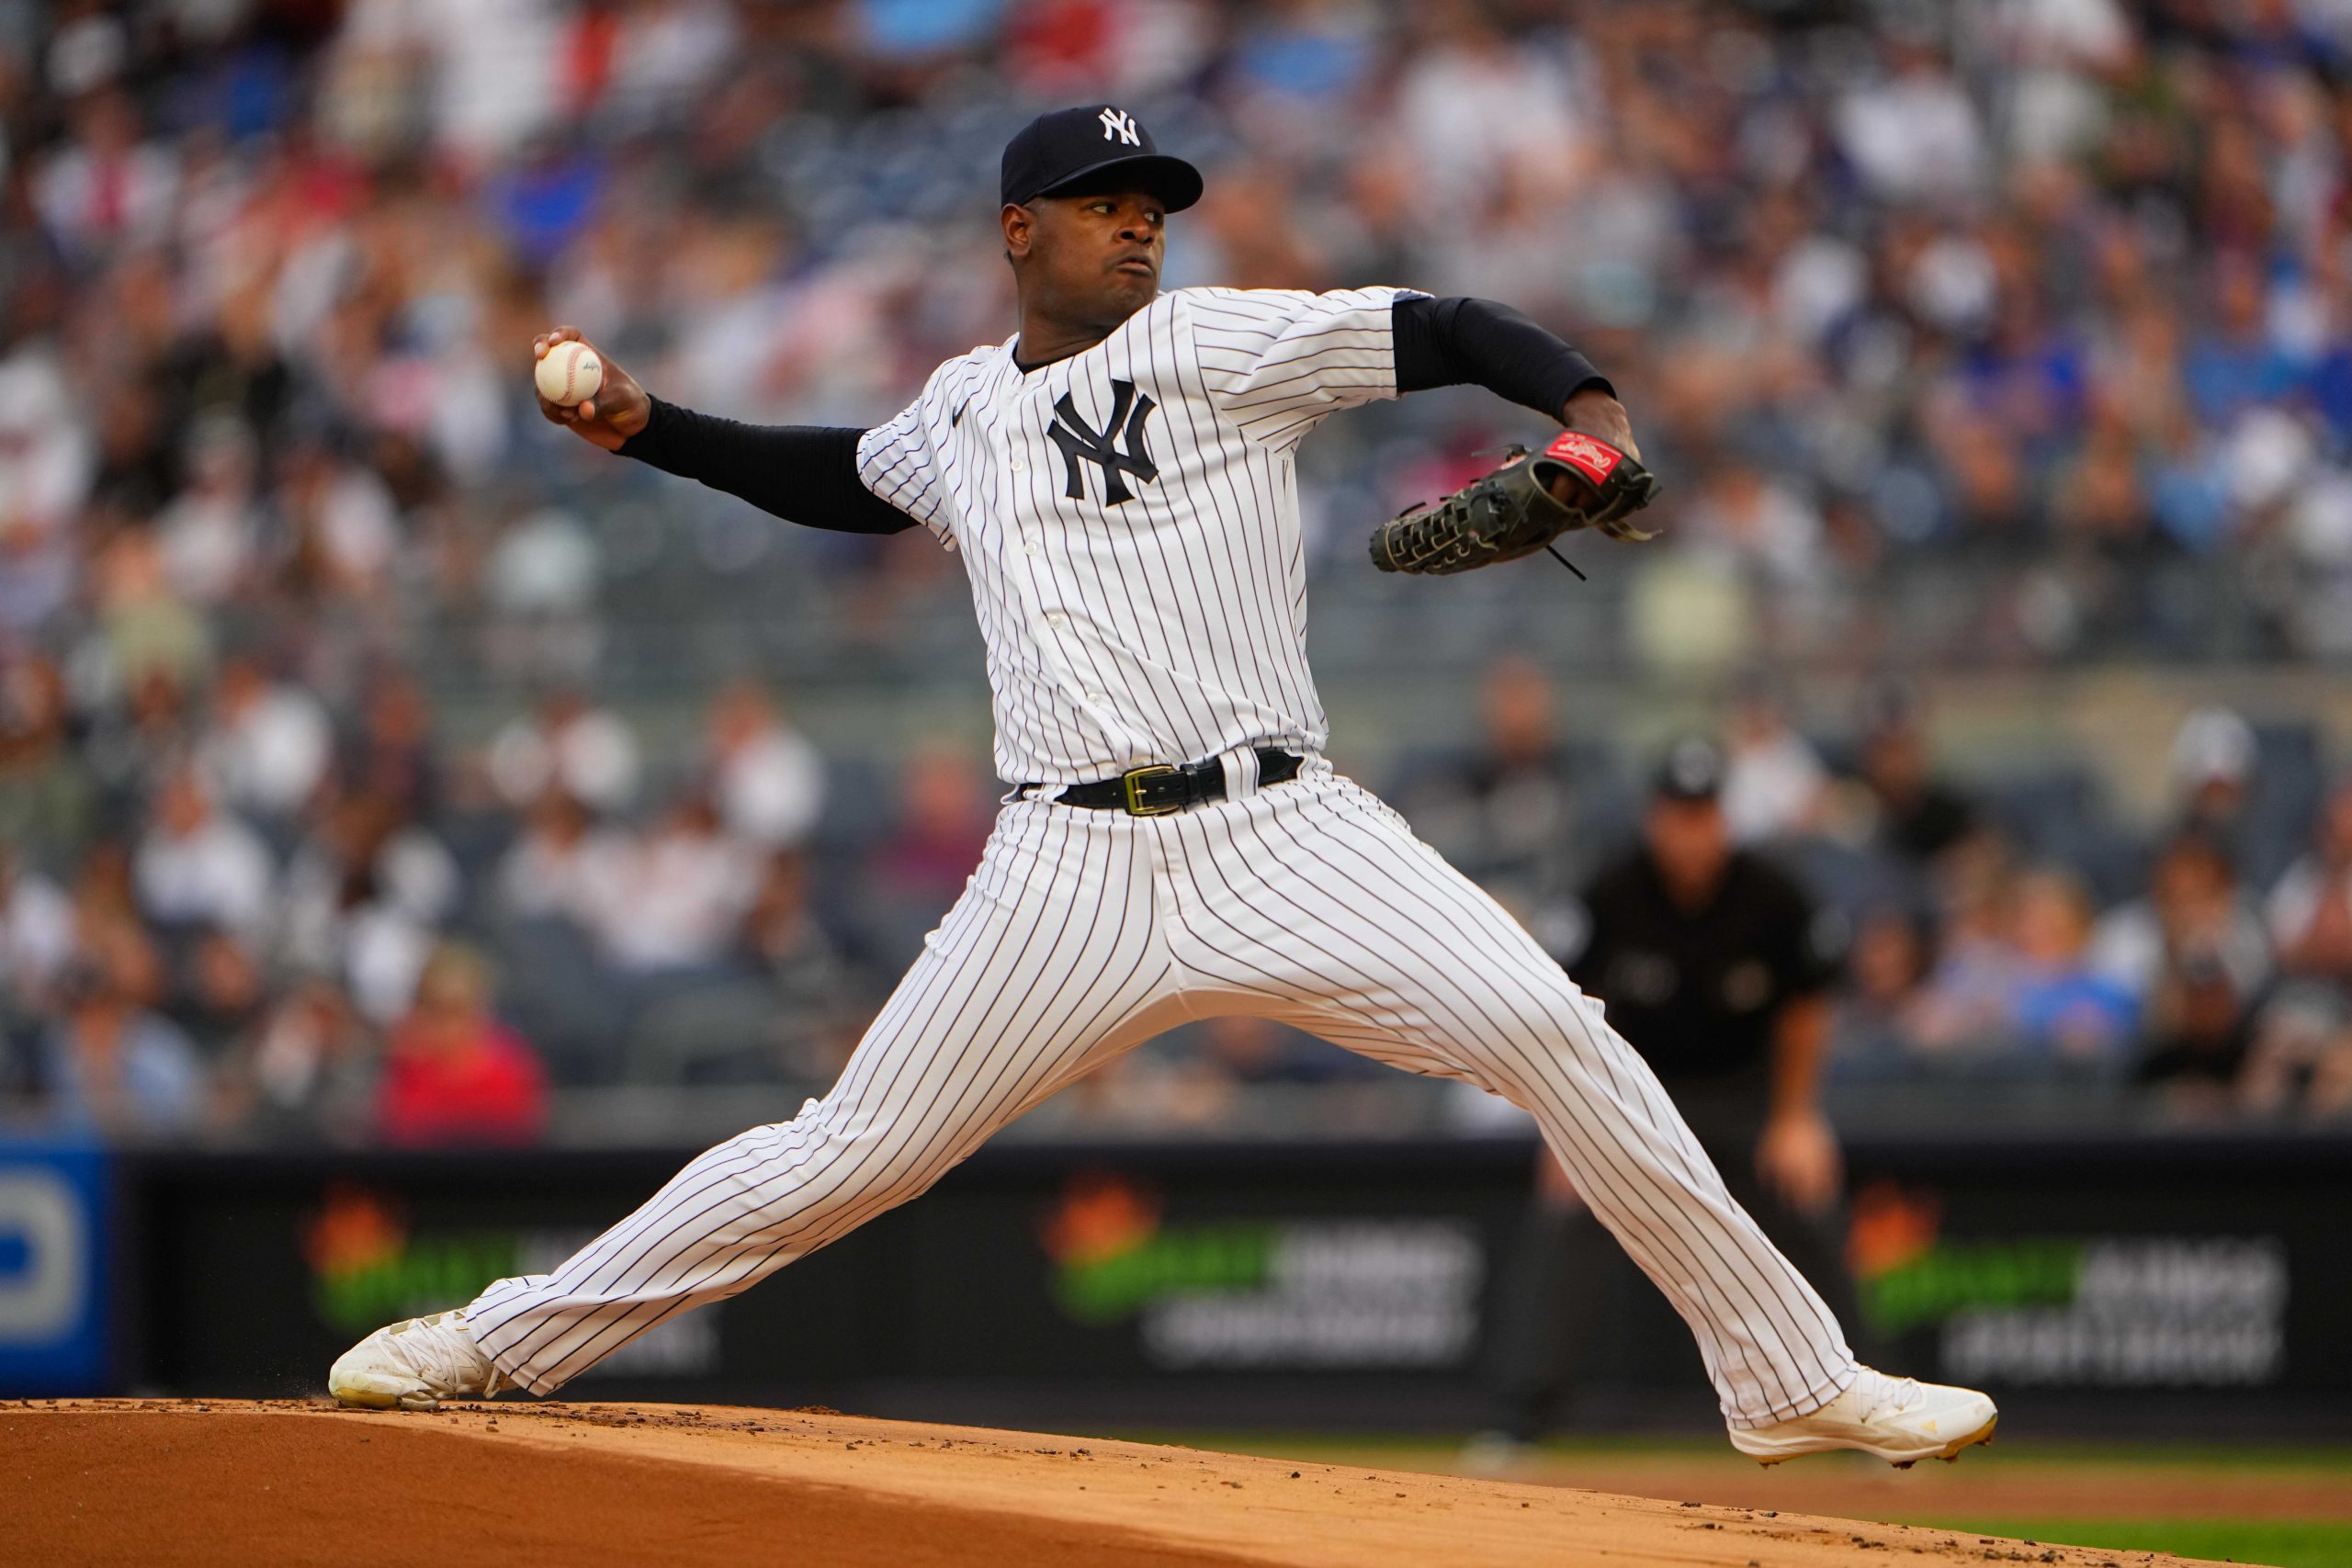 Jun 10, 2022; Bronx, New York, USA; New York Yankees pitcher Luis Severino (40) delivers a pitch against the Chicago Cubs during the first inning at Yankee Stadium. Mandatory Credit: Gregory Fisher-USA TODAY Sports